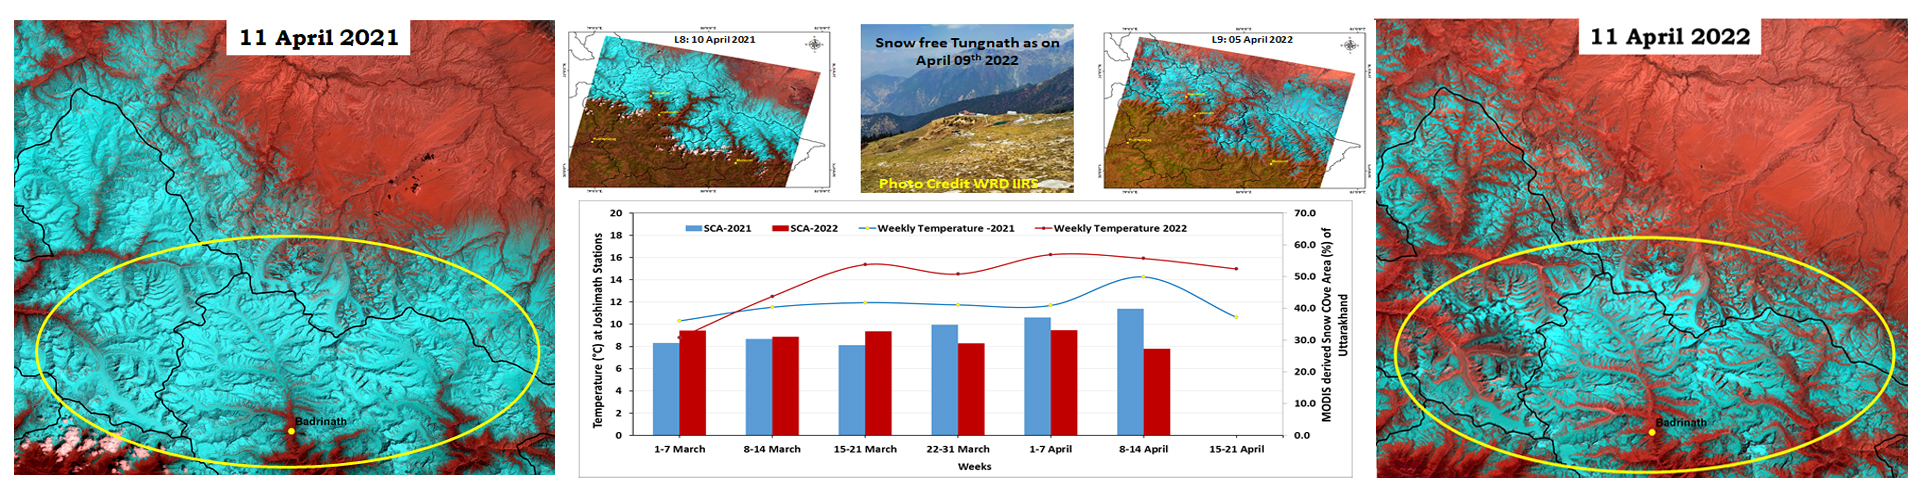 Image of Reduced Snow Cover in the Himalayan Region due to Temperature Anomaly During Early Summer of 2022